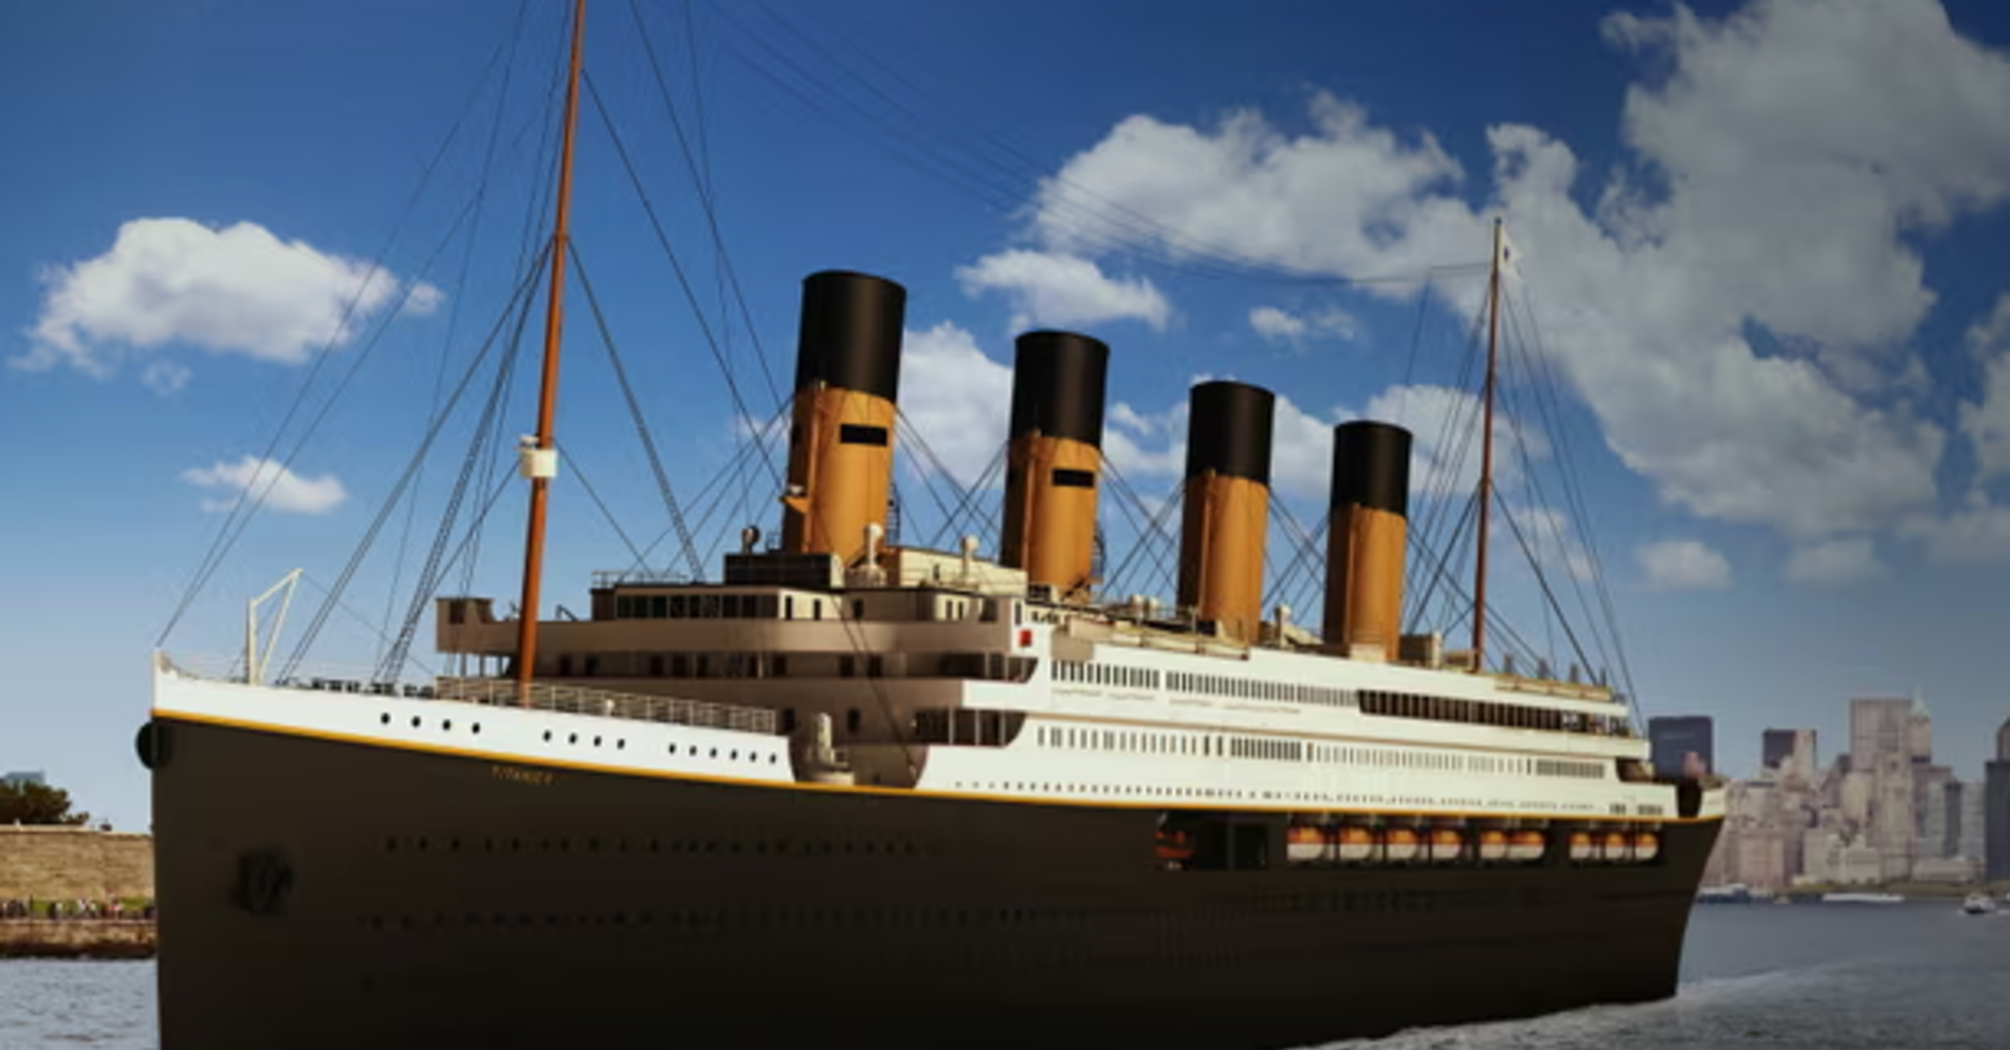 3D visualization of the Titanic II planned by Clive Palmer